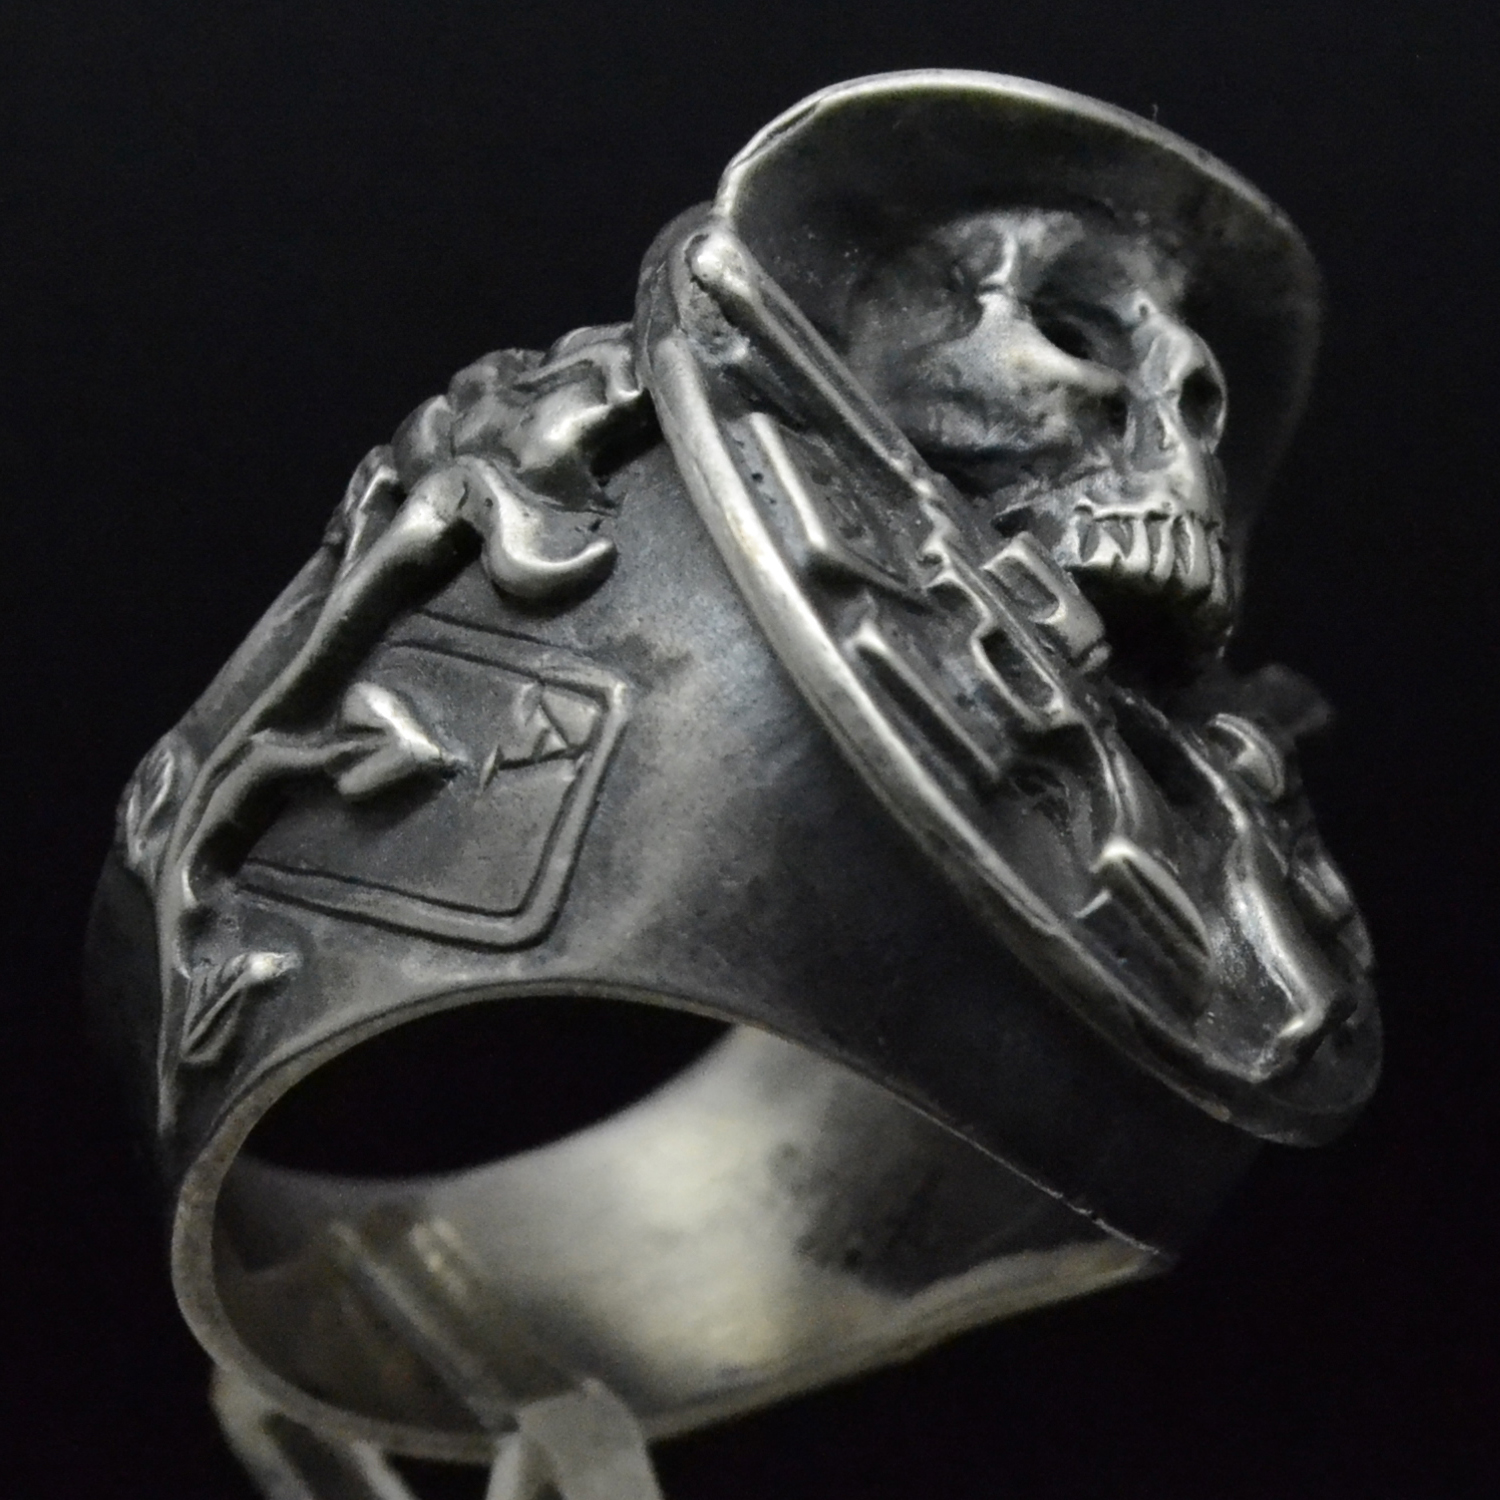 sterling_silver_biker_skull_ring_outlaw_cowboy_jewelry_signorings_signo_7a